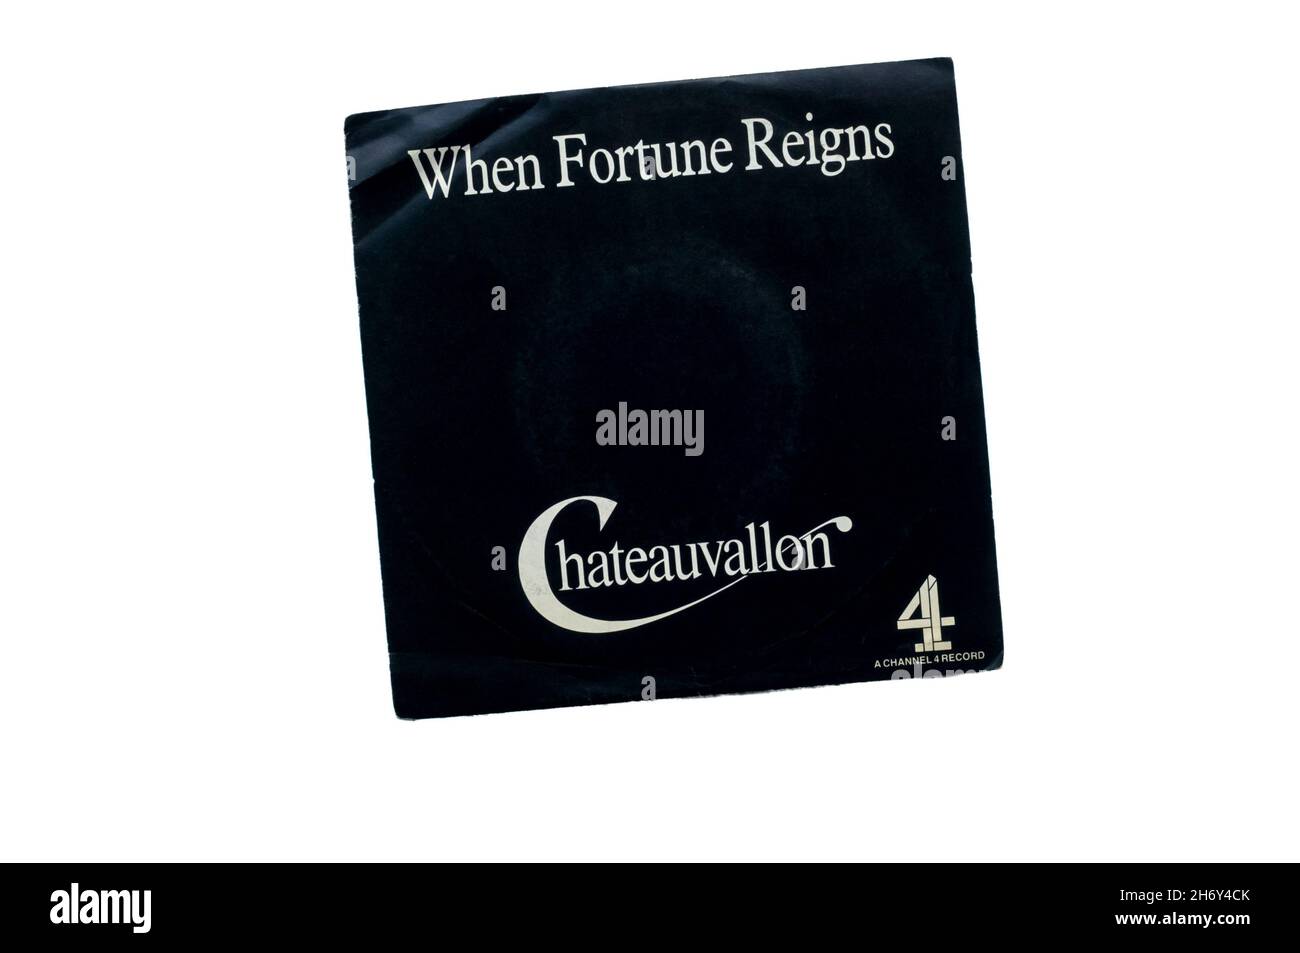 1987 7' single, When Fortune Reigns and Puissance et Gloire.  Music from Channel 4 French TV series Chateauvallon. Stock Photo